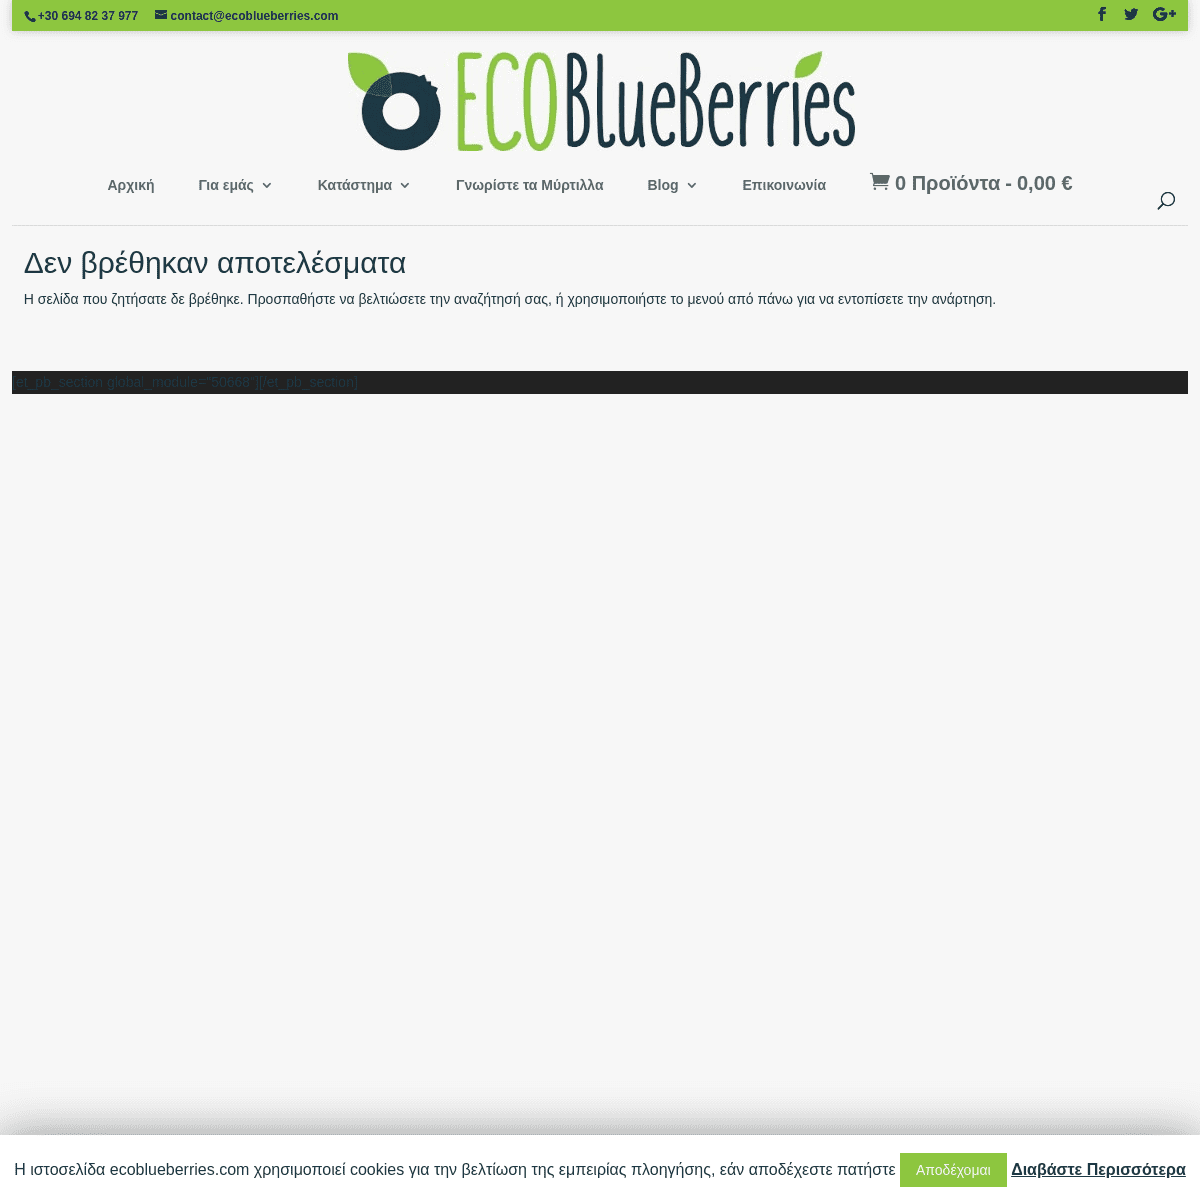 A complete backup of ecoblueberries.com